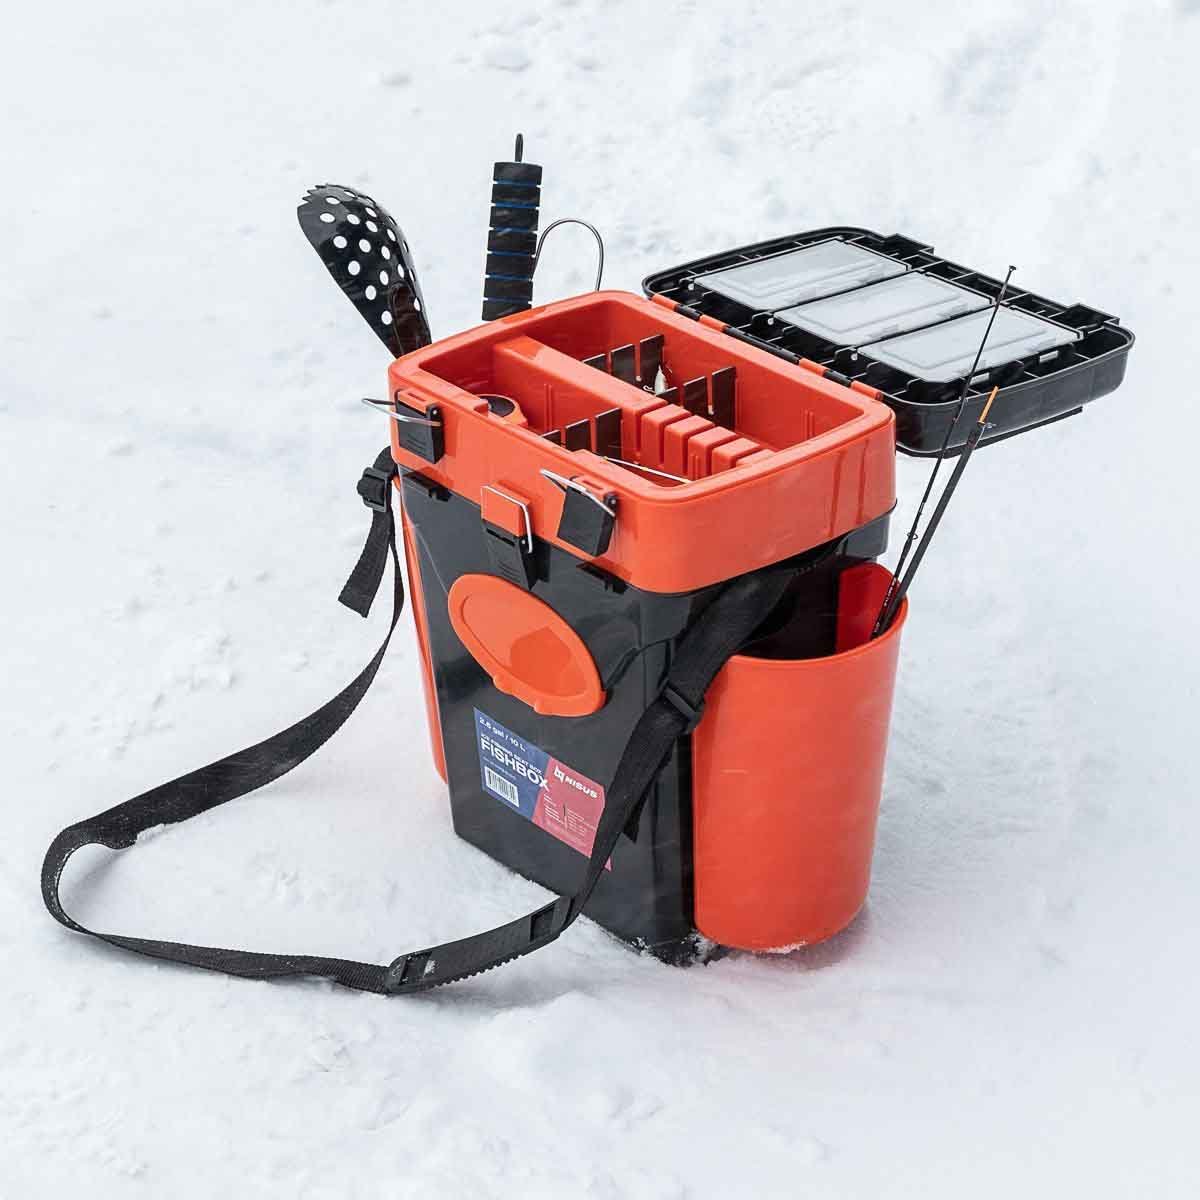 FishBox 10 liter Box for Ice Fishing could carry an ice skimmer, a rod and reel combo and other gear for ice fishing